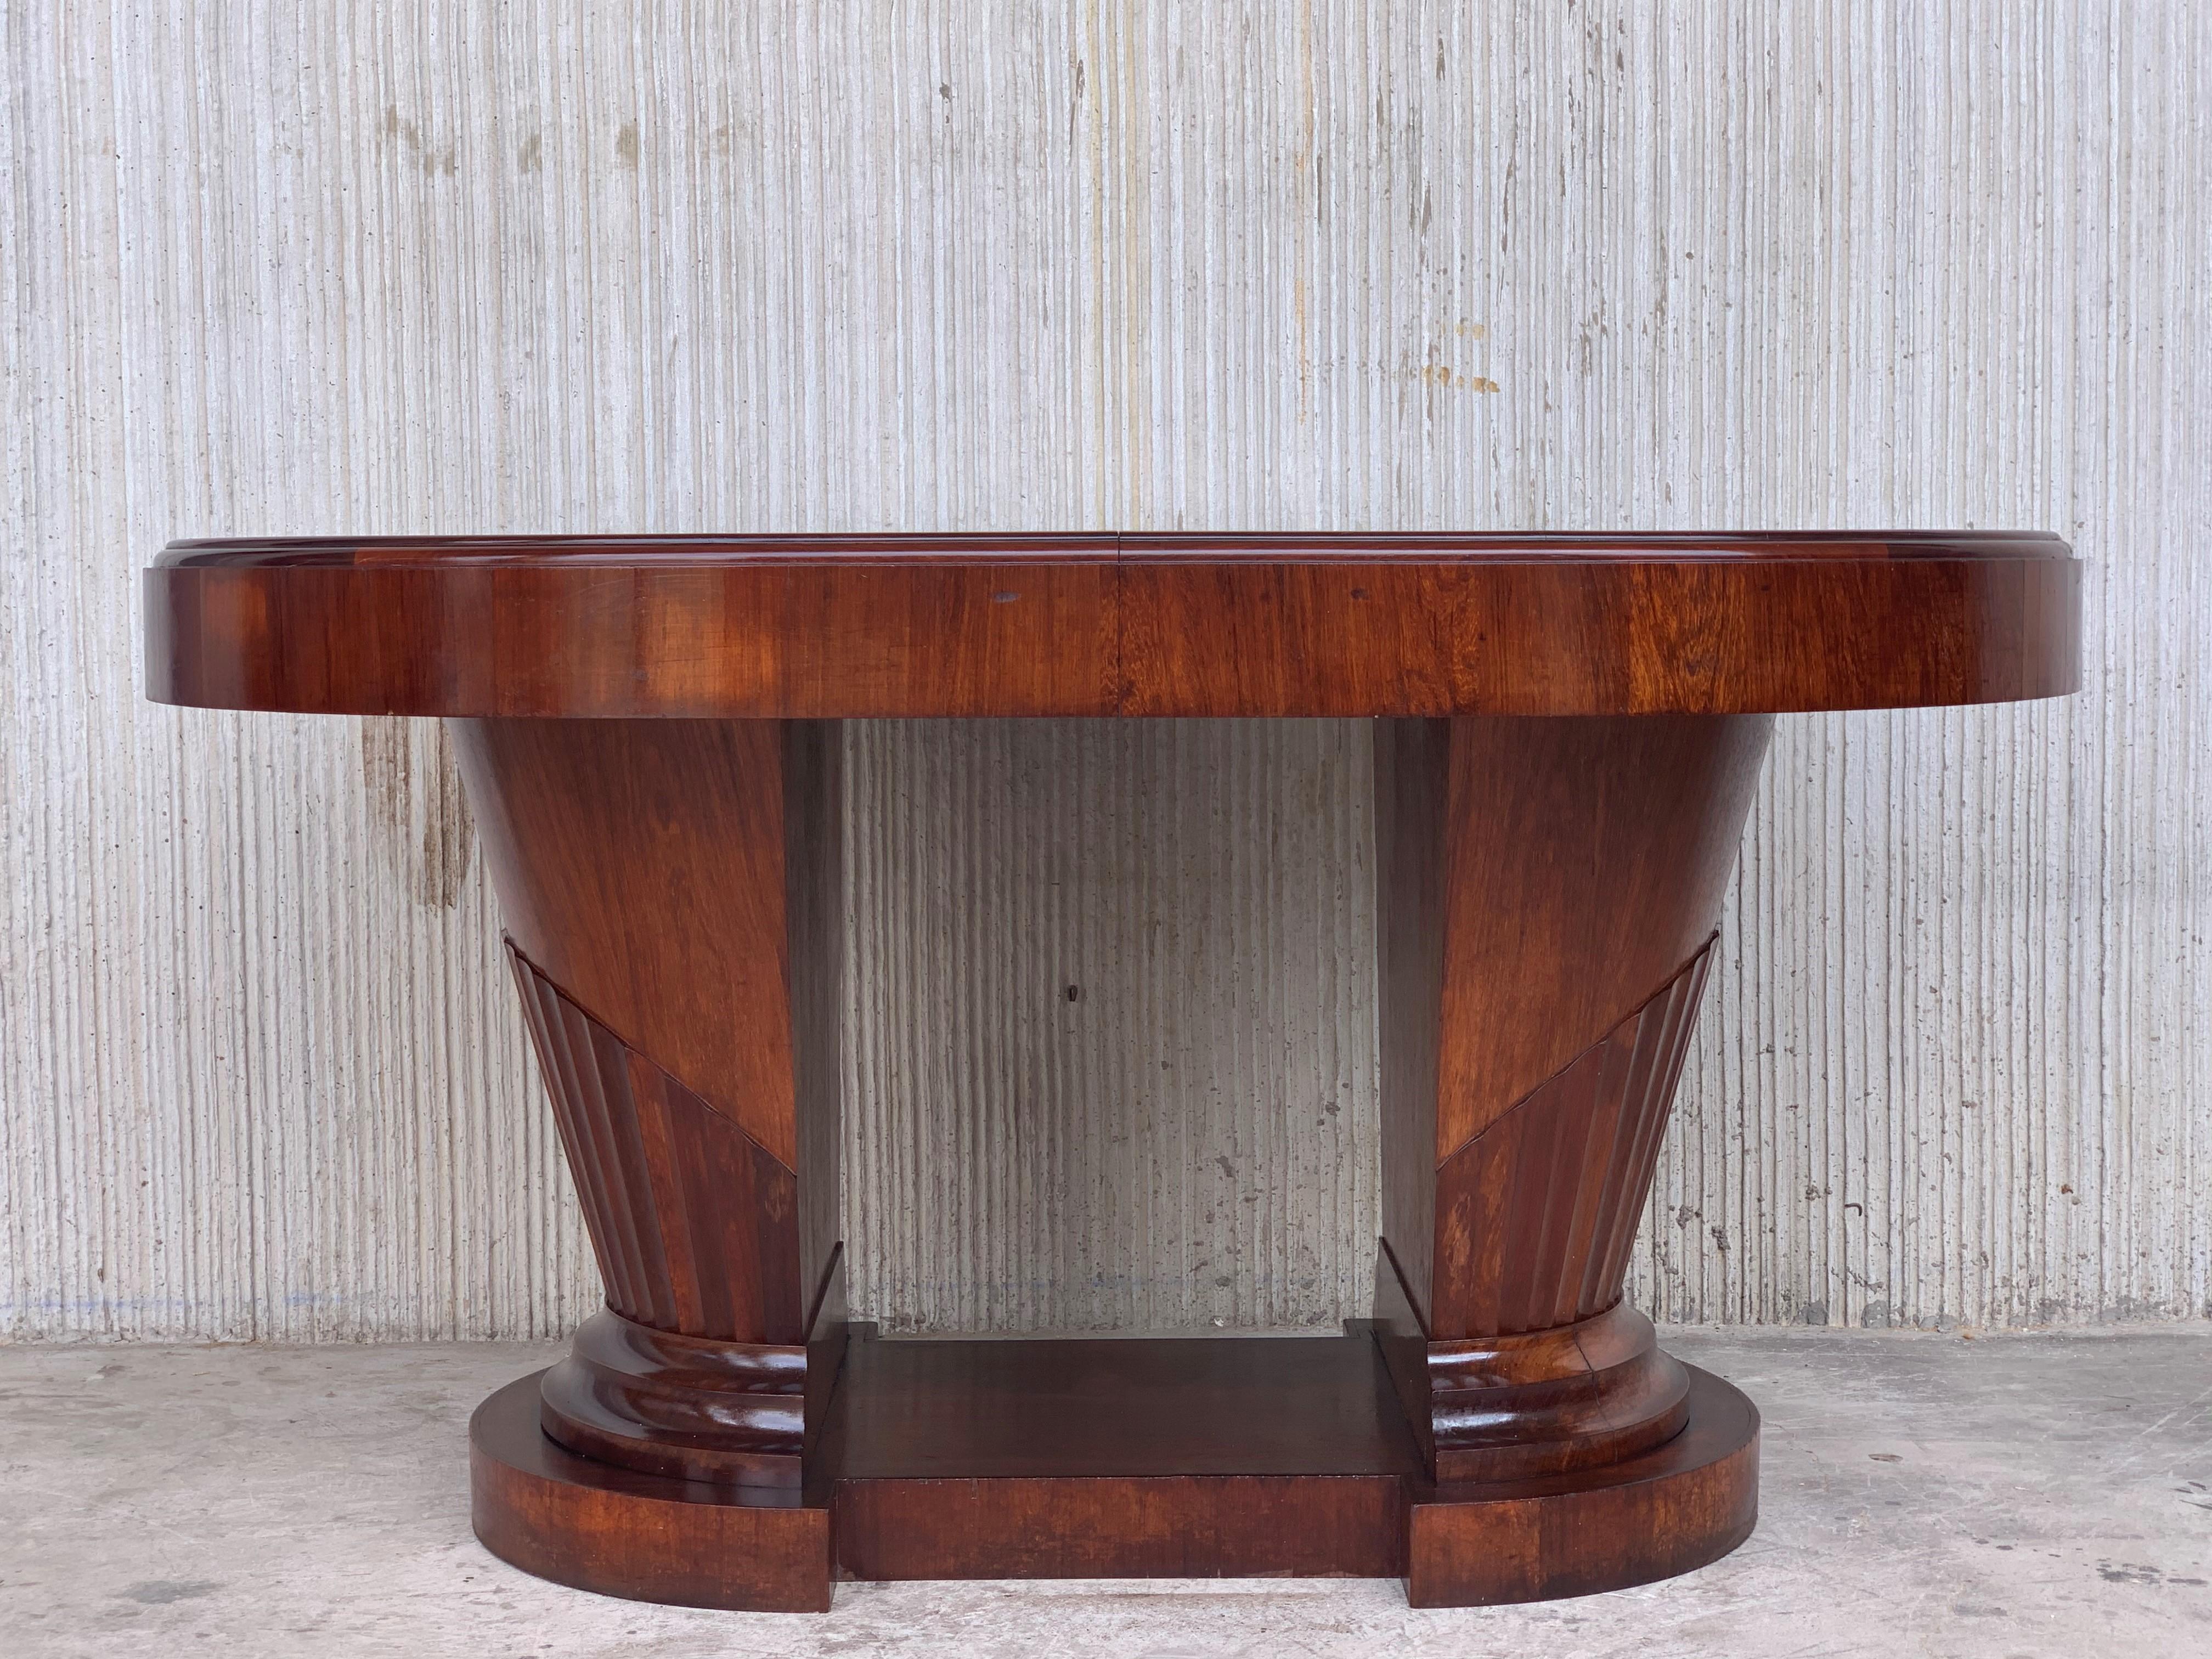 Fine French Art Deco mahogany pedestal oval table with a burl elm inlay on the apron. With extension leave (total extension 77.55in.)


 